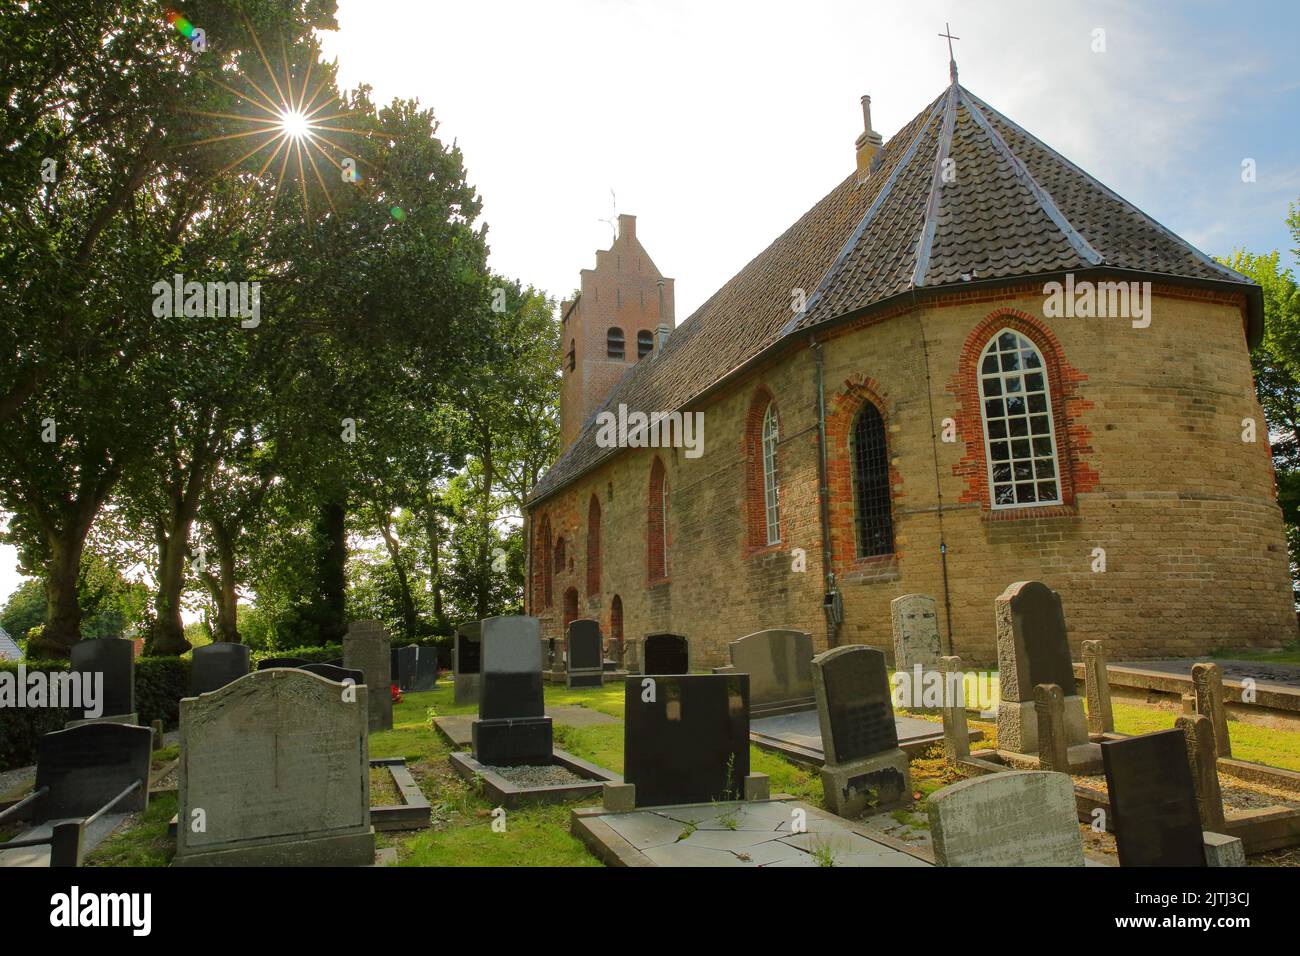 The Reformed Church (Hervormde Kerk), located on the mound of Hogebeintum, Friesland, Netherlands, with tombs in the foreground Stock Photo